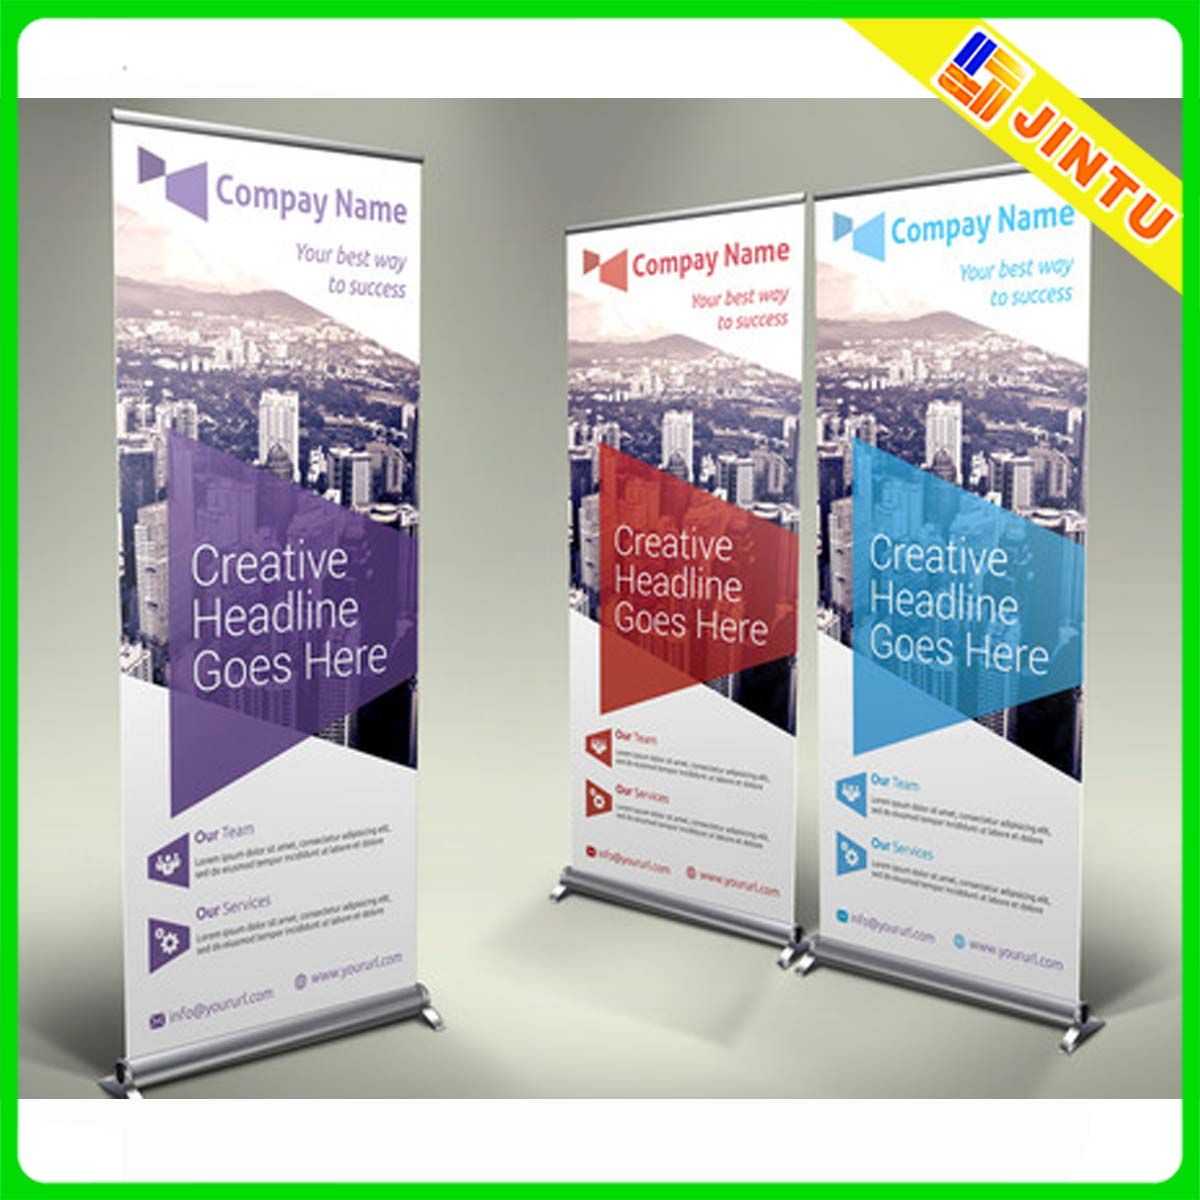 Pinnicole Kirsten On Trade Show Booth Design | Pull Up For Vinyl Banner Design Templates